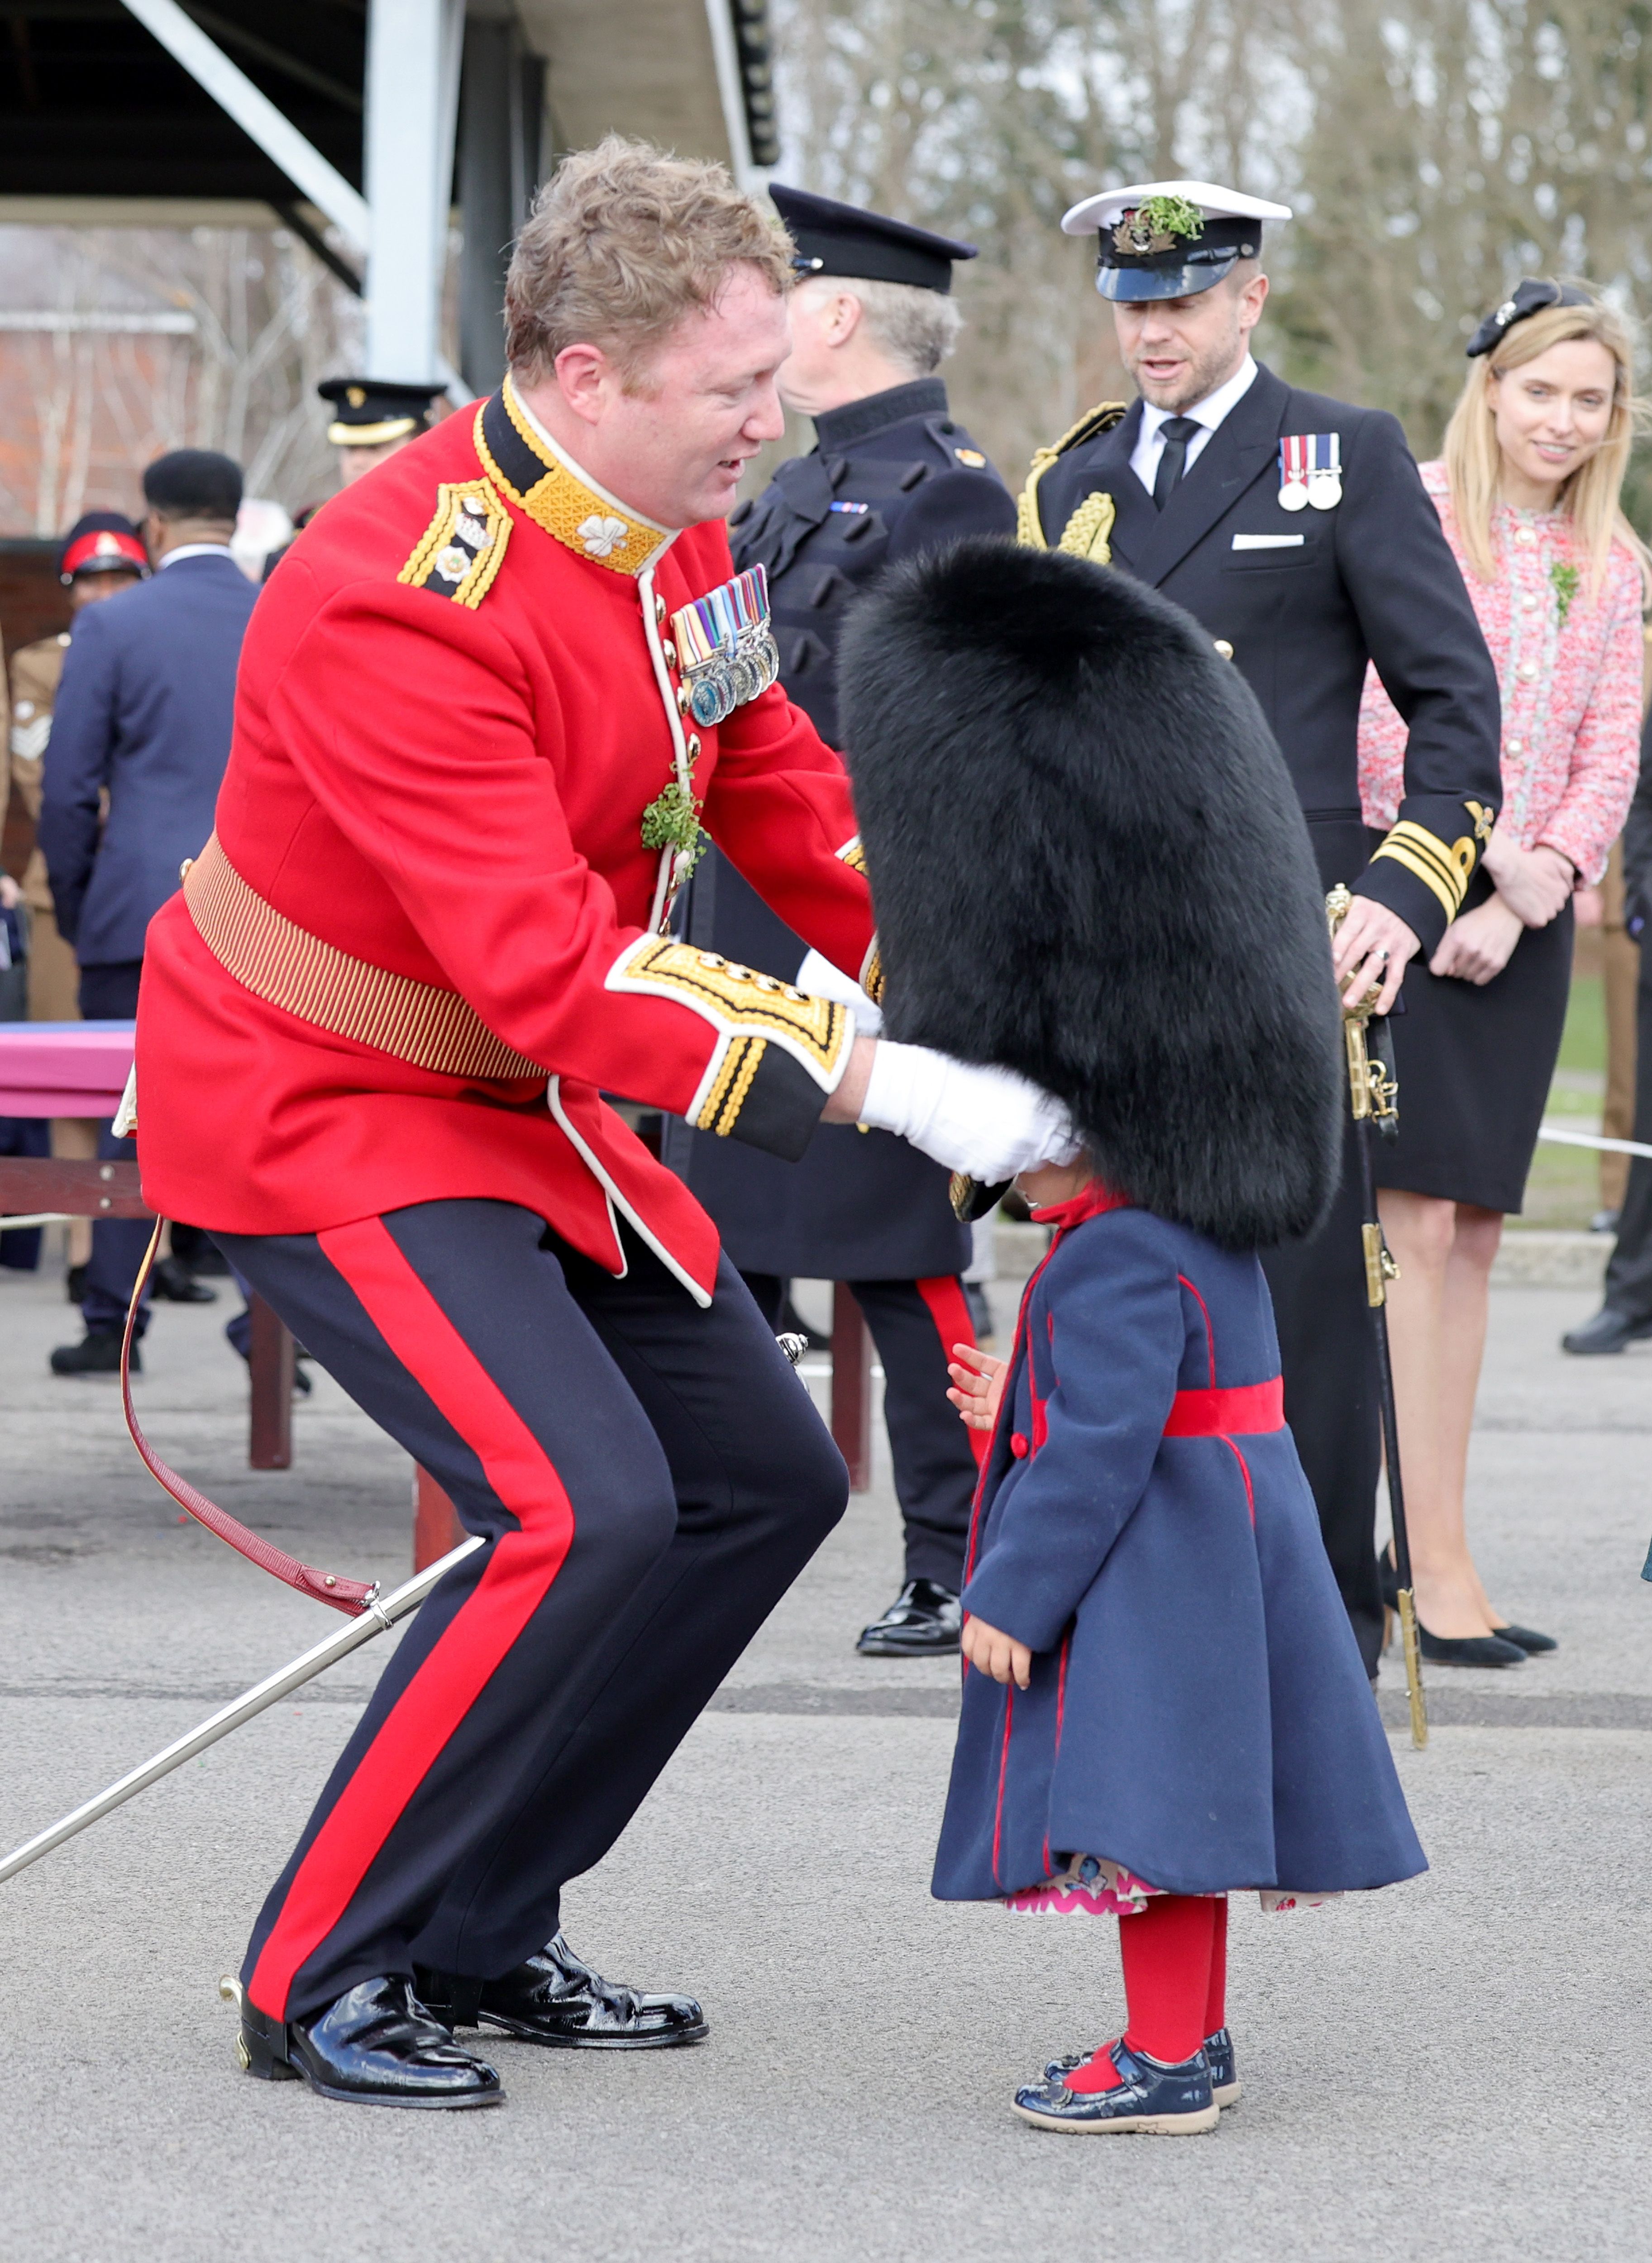 Lieutenant Colonel Rob Money puts a bearskin hat on his 20-month-old daughter Gaia Money's head at the 1st Battalion Irish Guards for the St Patrick's Day Parade, at Mons Barracks in Aldershot